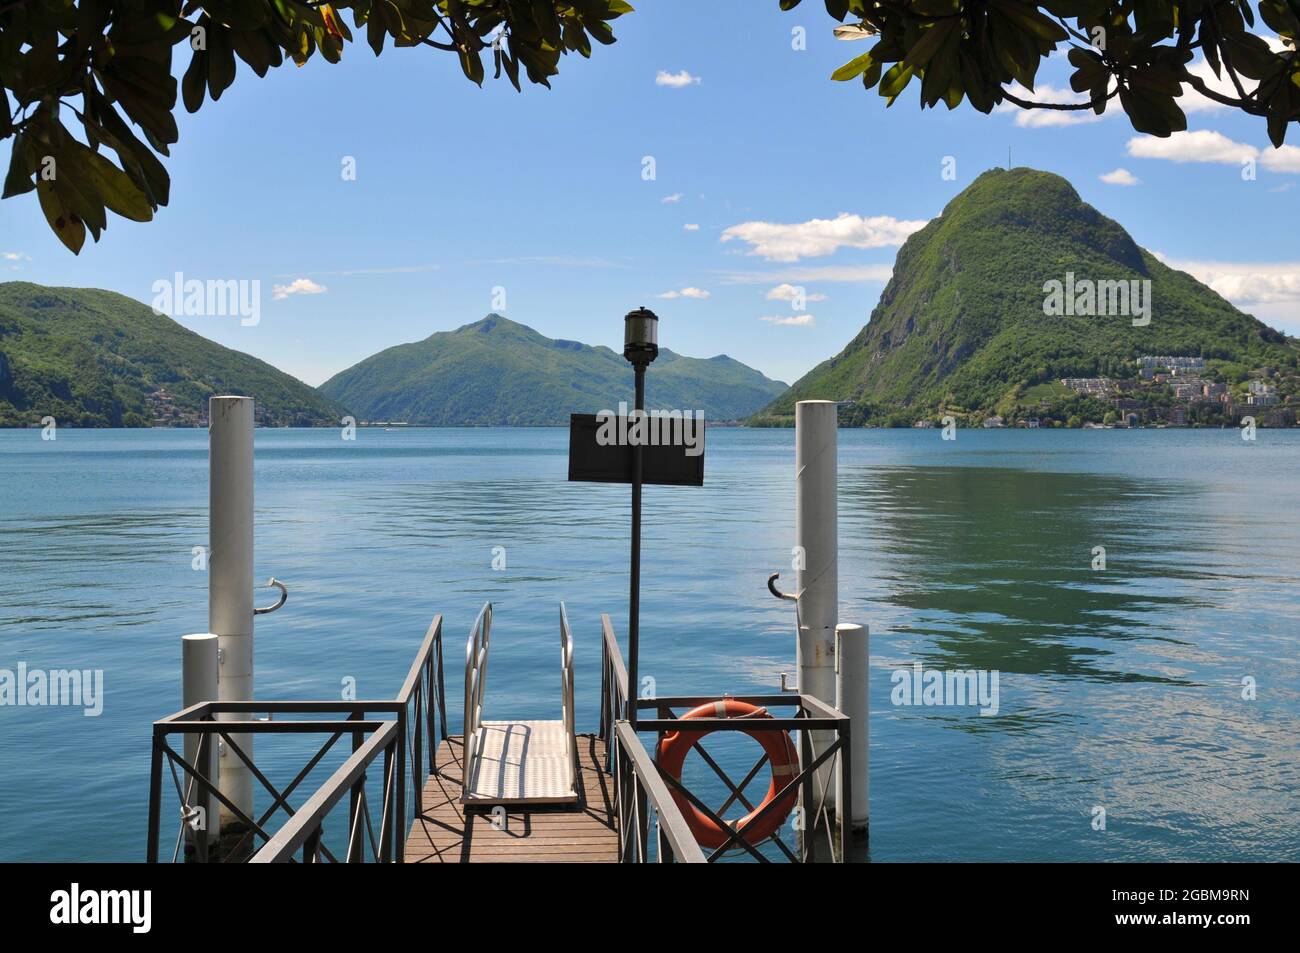 Landscape view of the beautiful Lake Lugano and Monte San Salvatore (also known as Mount San Salvatore) on a sunny summer day Stock Photo